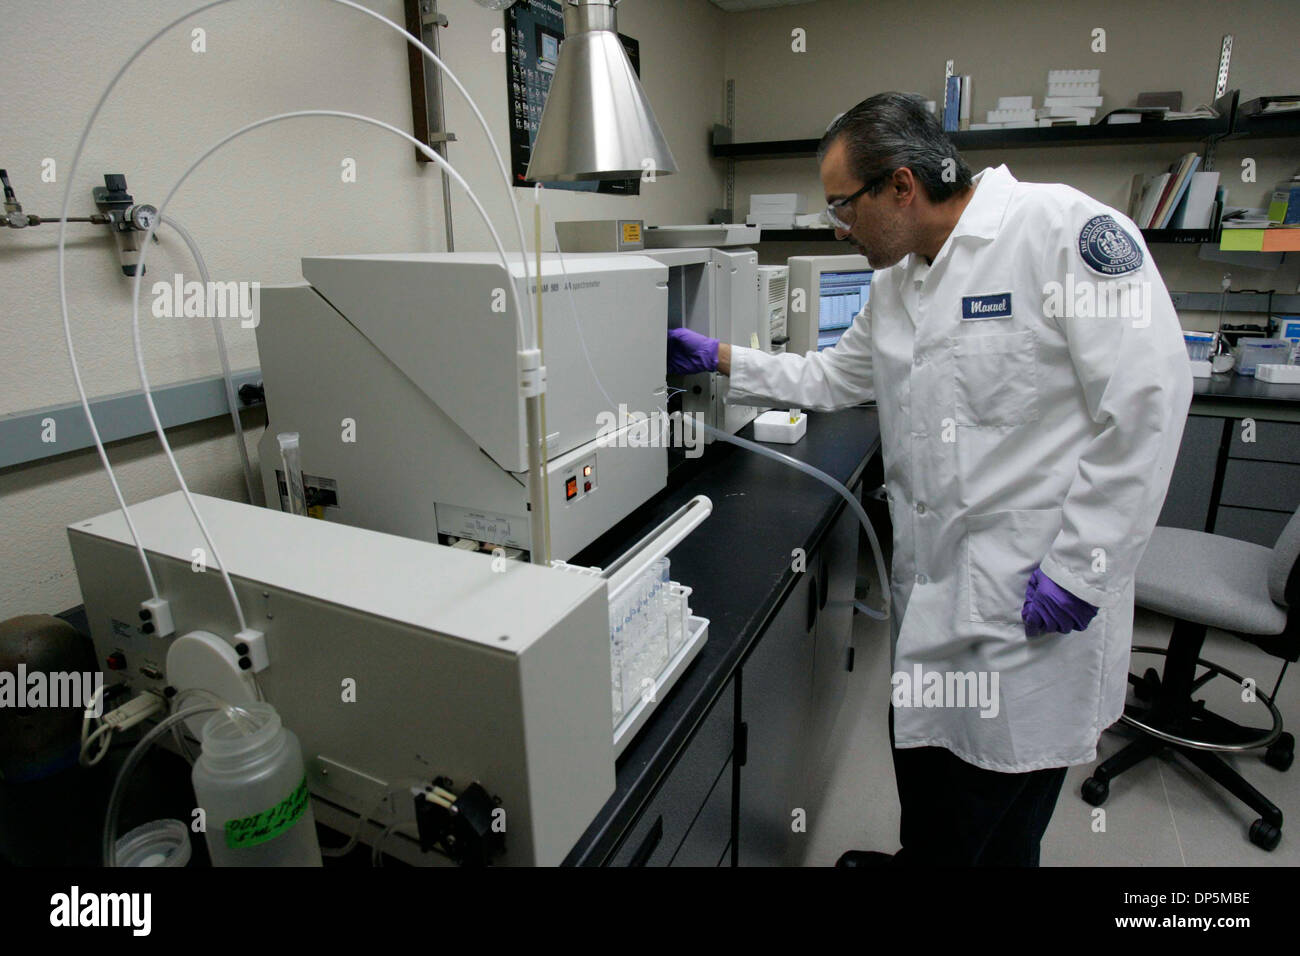 Sep 19, 2006; San Diego, CA, USA; Chemist MANUEL ROMERO, checked for iron in water samples with an atomic absorption  spectrometer at the City of San Diego Water Quality Laboratory Environmental Monitoring and  Technical Services Division on Monday, September 19, 2006.    Mandatory Credit: Photo by John Gibbins/SDU-T/ZUMA Press. (©) Copyright 2006 by SDU-T Stock Photo